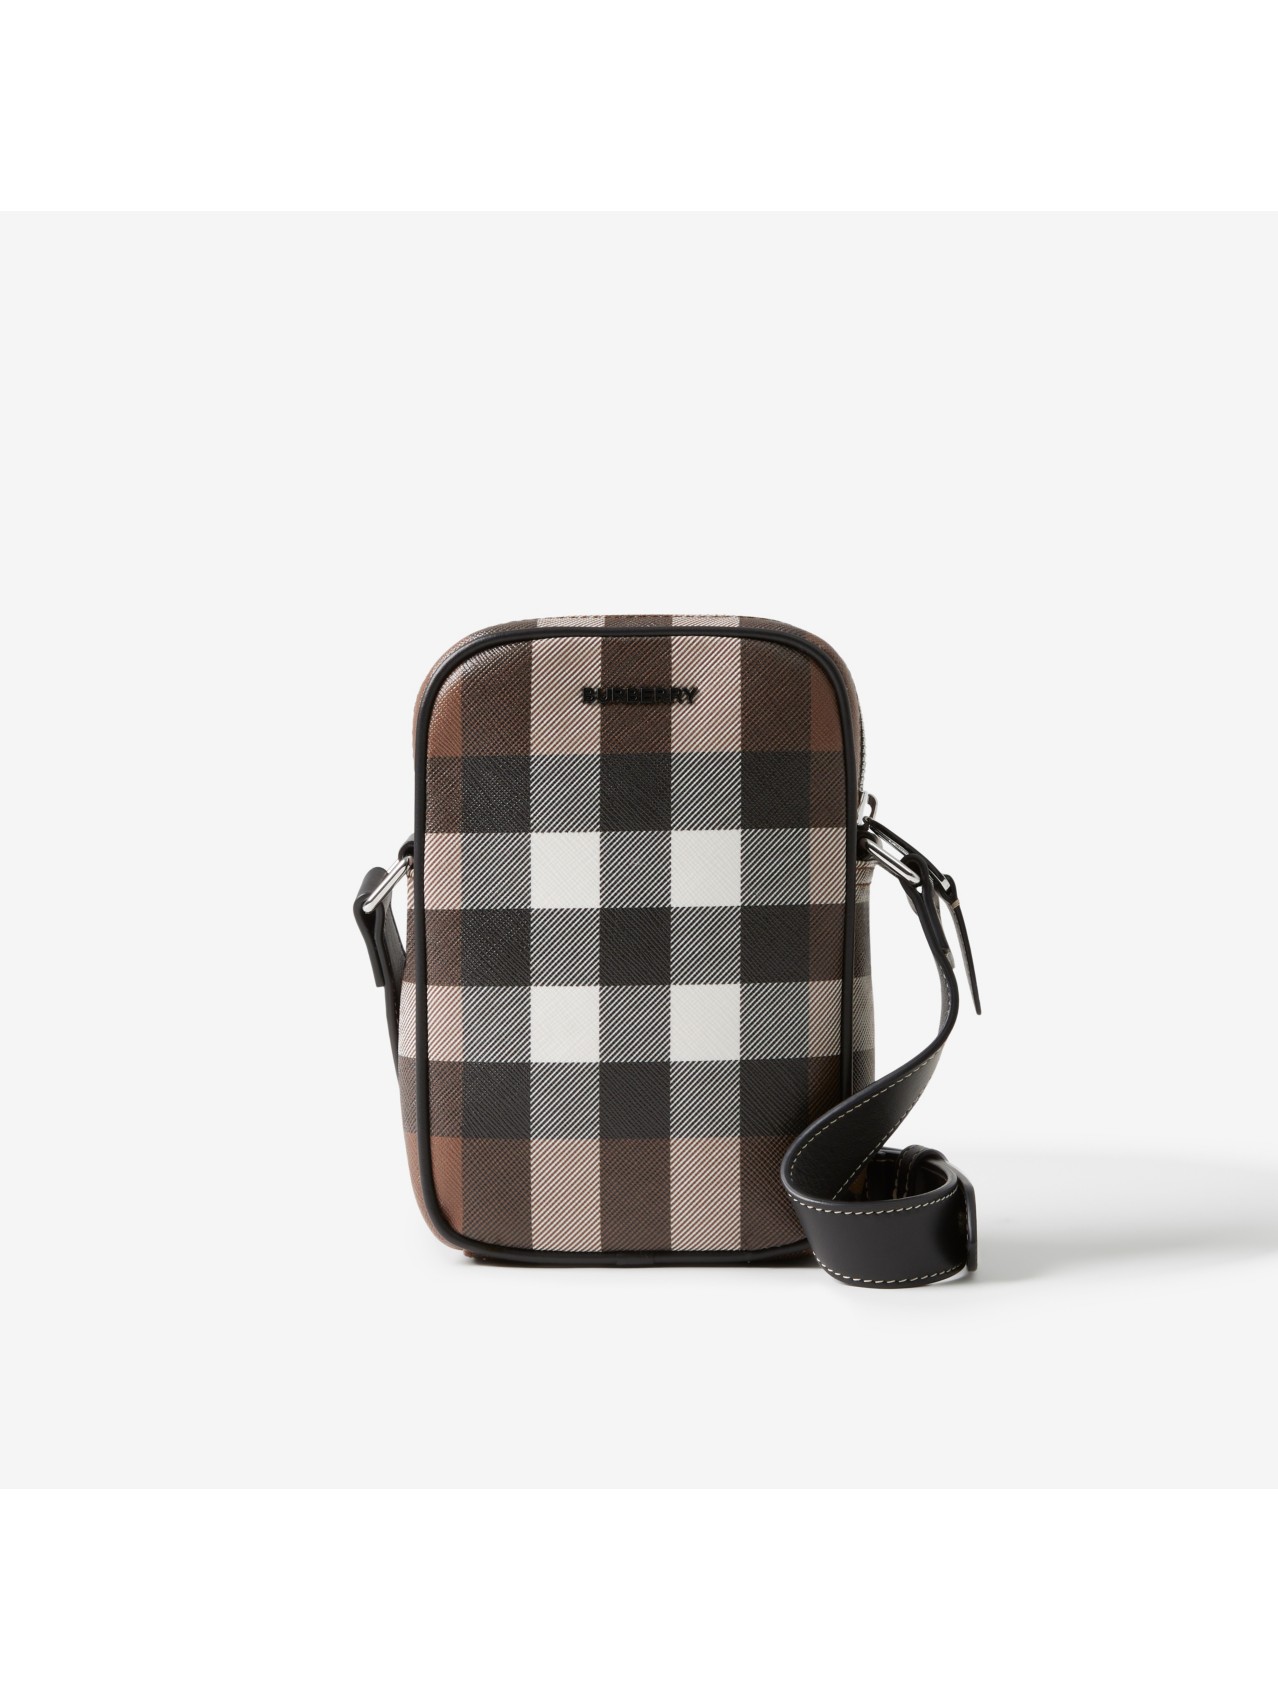 Men's Bags | Check & Leather Bags for Men | Burberry® Official